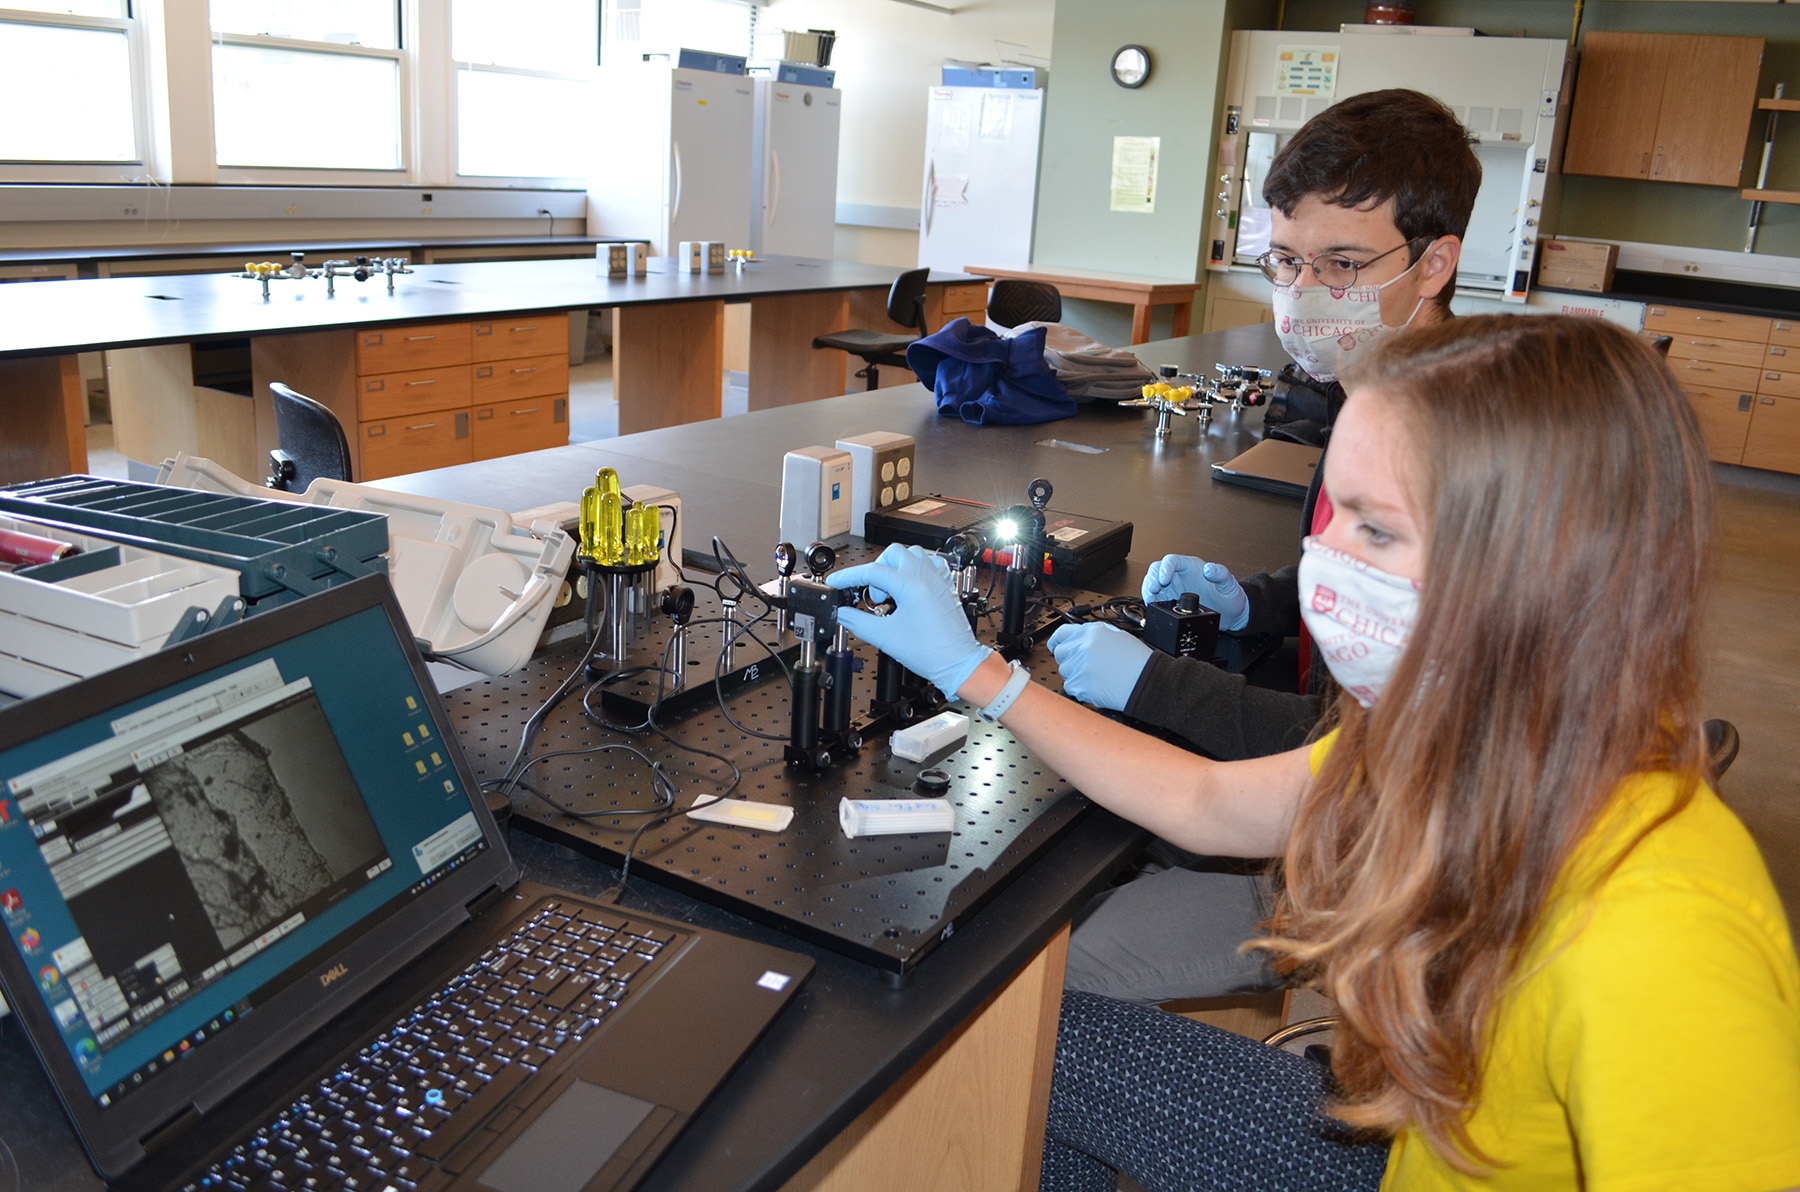 Isabel O’Malley Krohn and Nichos Molnar build a microscope on rails during the Optics, Waves, and Modern Physics course. Credit: Diana Kenney